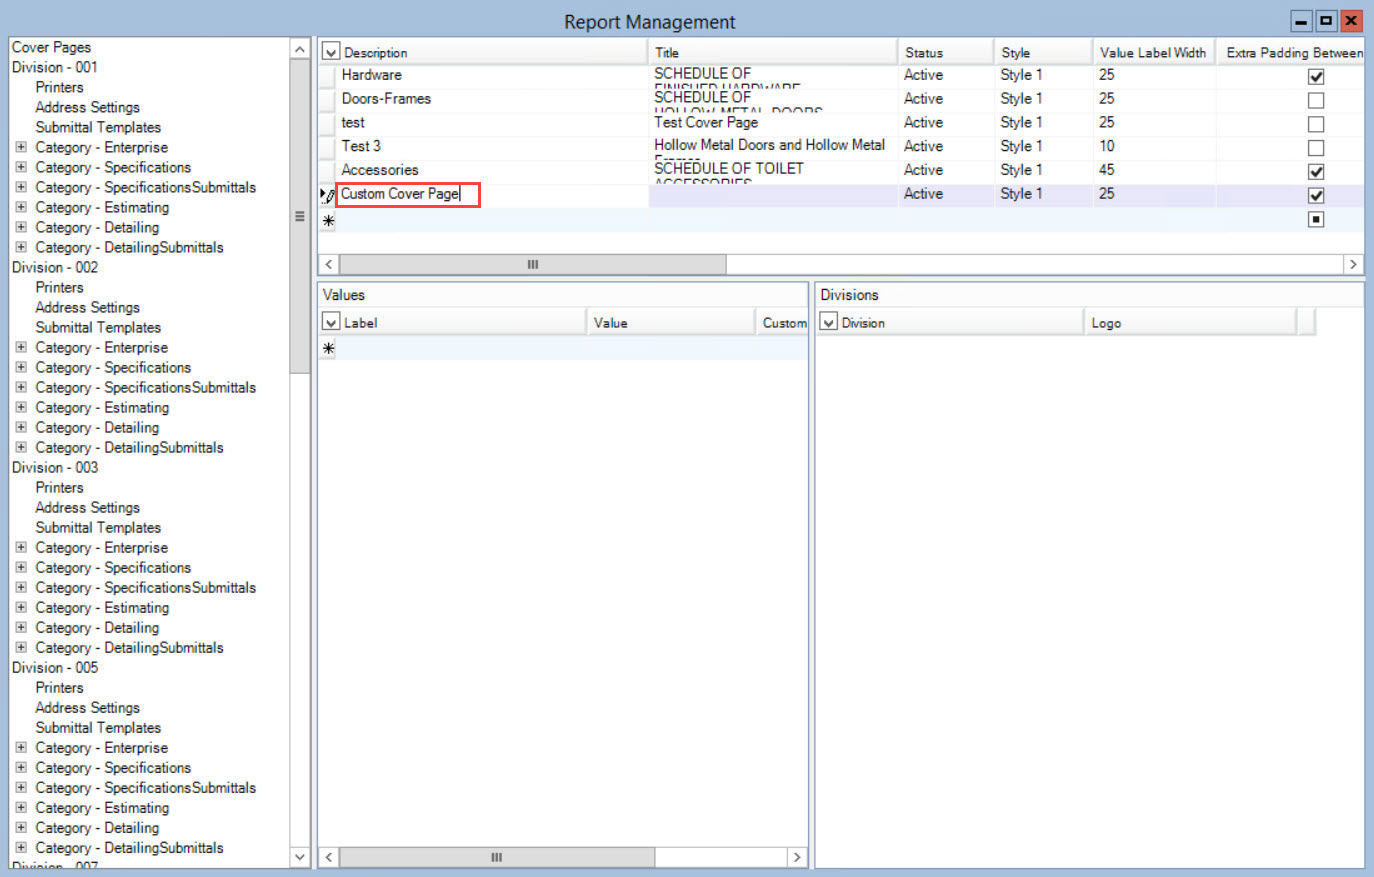 Report Management window; shows the location of the Description field and an example description.